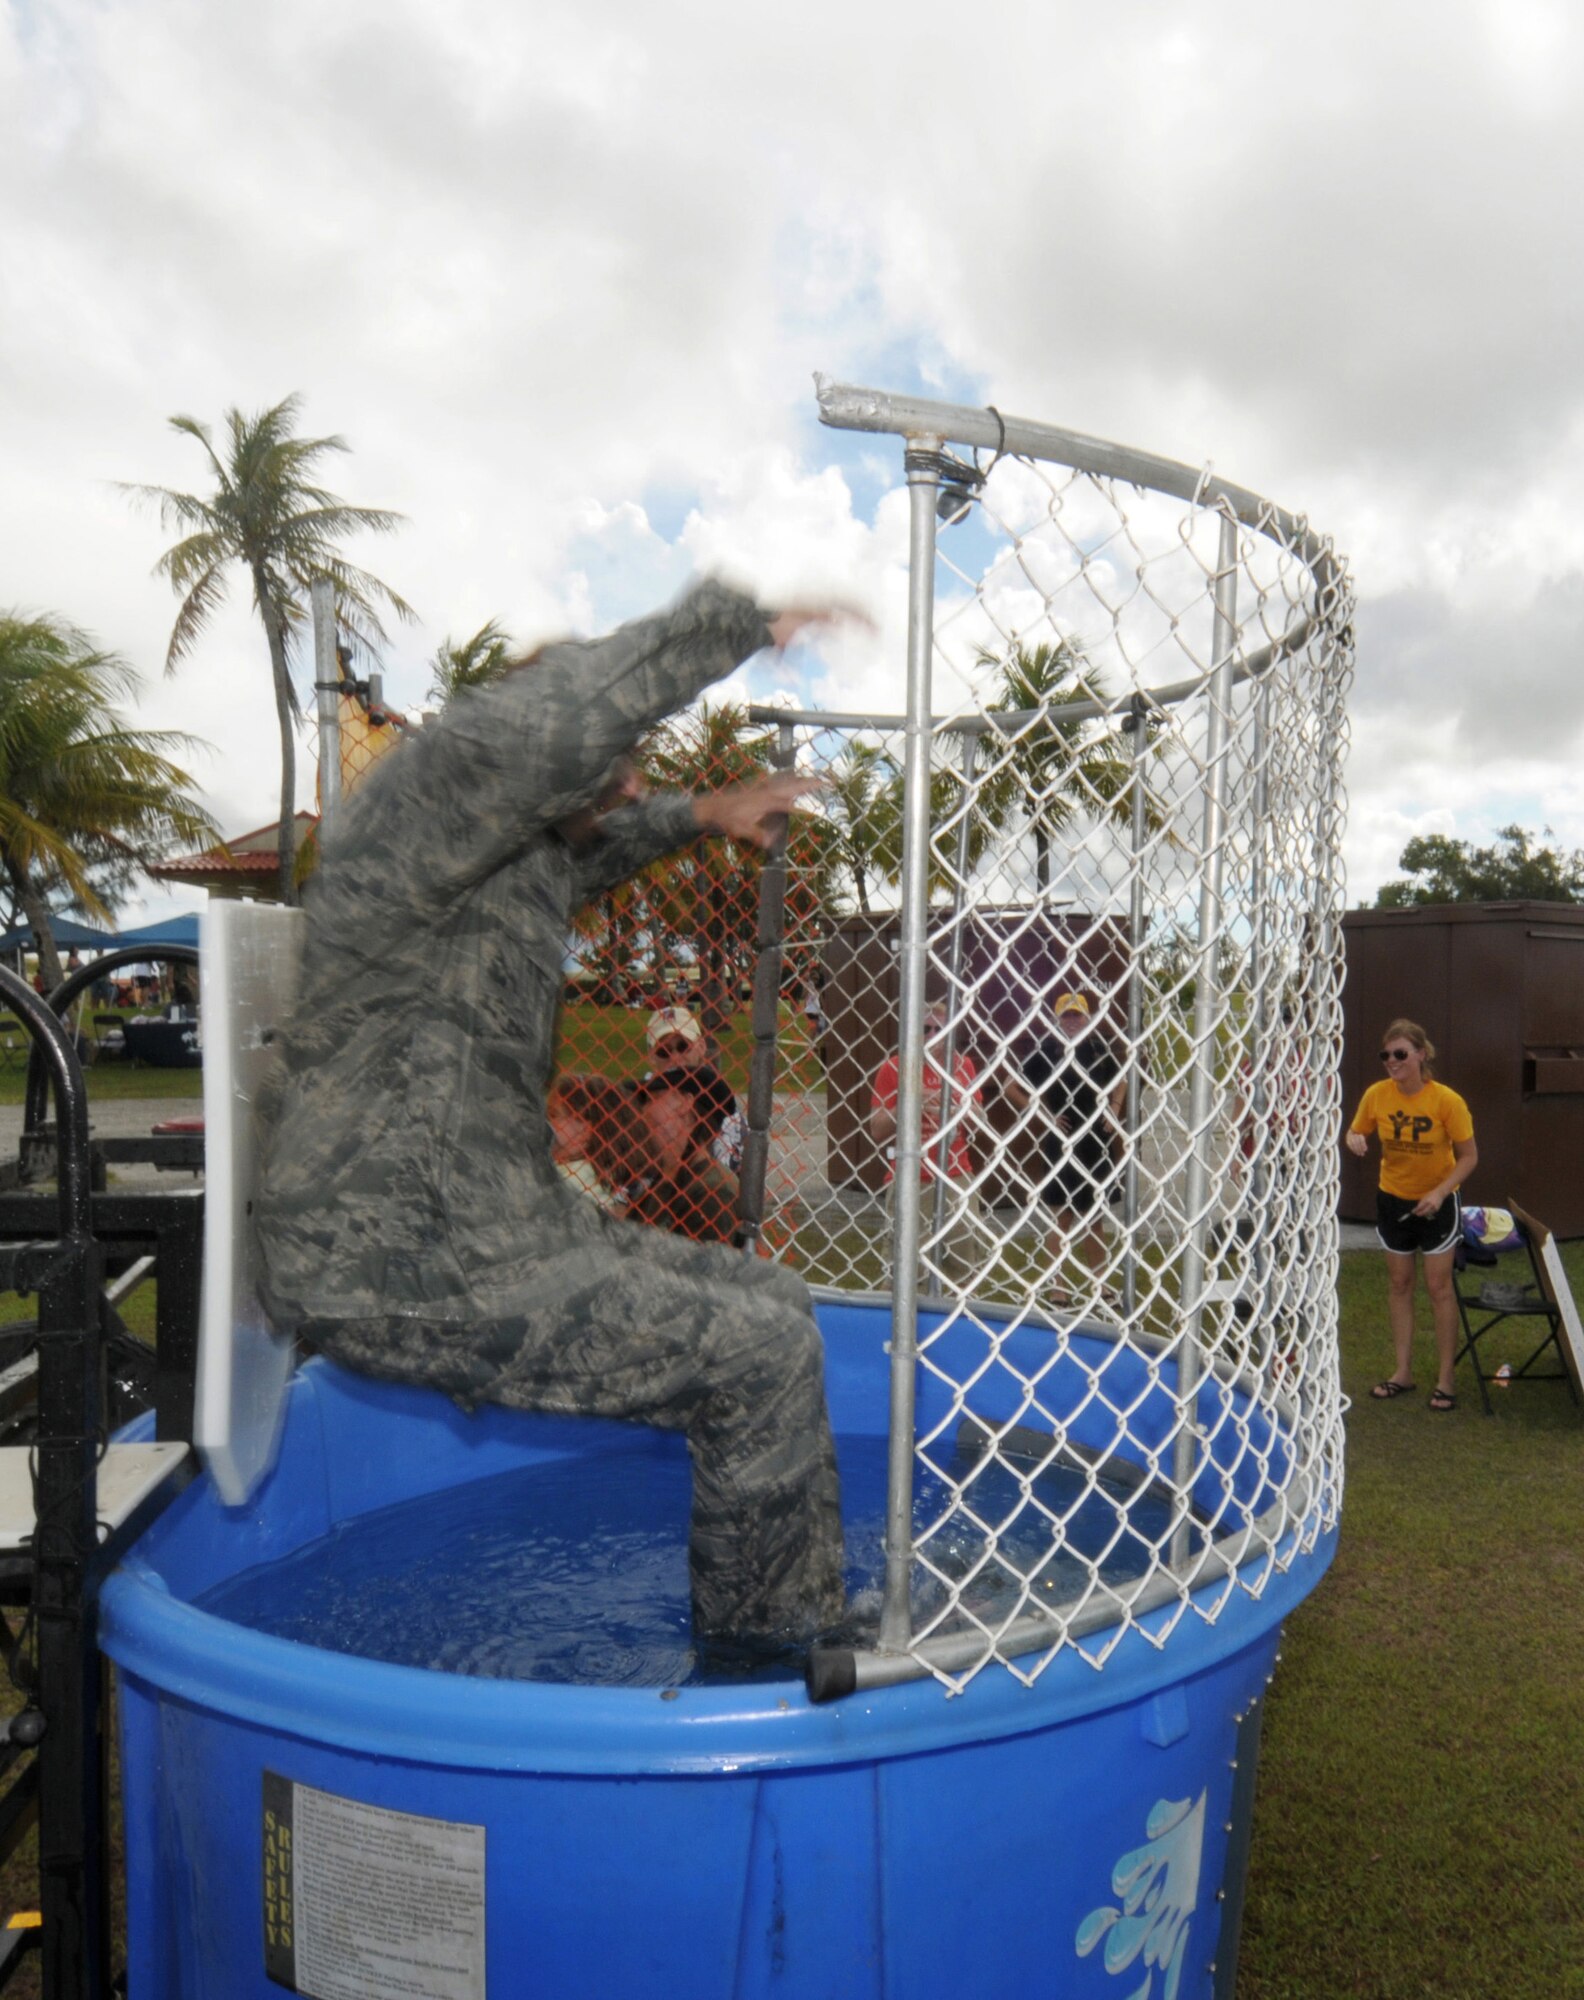 ANDERSEN AIR FORCE BASE, Guam - Lt Col Brian Hinsvark, 36th Force Support Squadron commander, tests the water of the dunking booth, to the enjoyment of the crowd during Andersen's Freedom Fest 2009 here July 2.  Other entertainment included live music, face painting, a water slide, a bouncy castle, horse rides, paintball, pie eating contests and free food. (U.S. Air Force photo by Tech. Sgt. Michael Boquette)